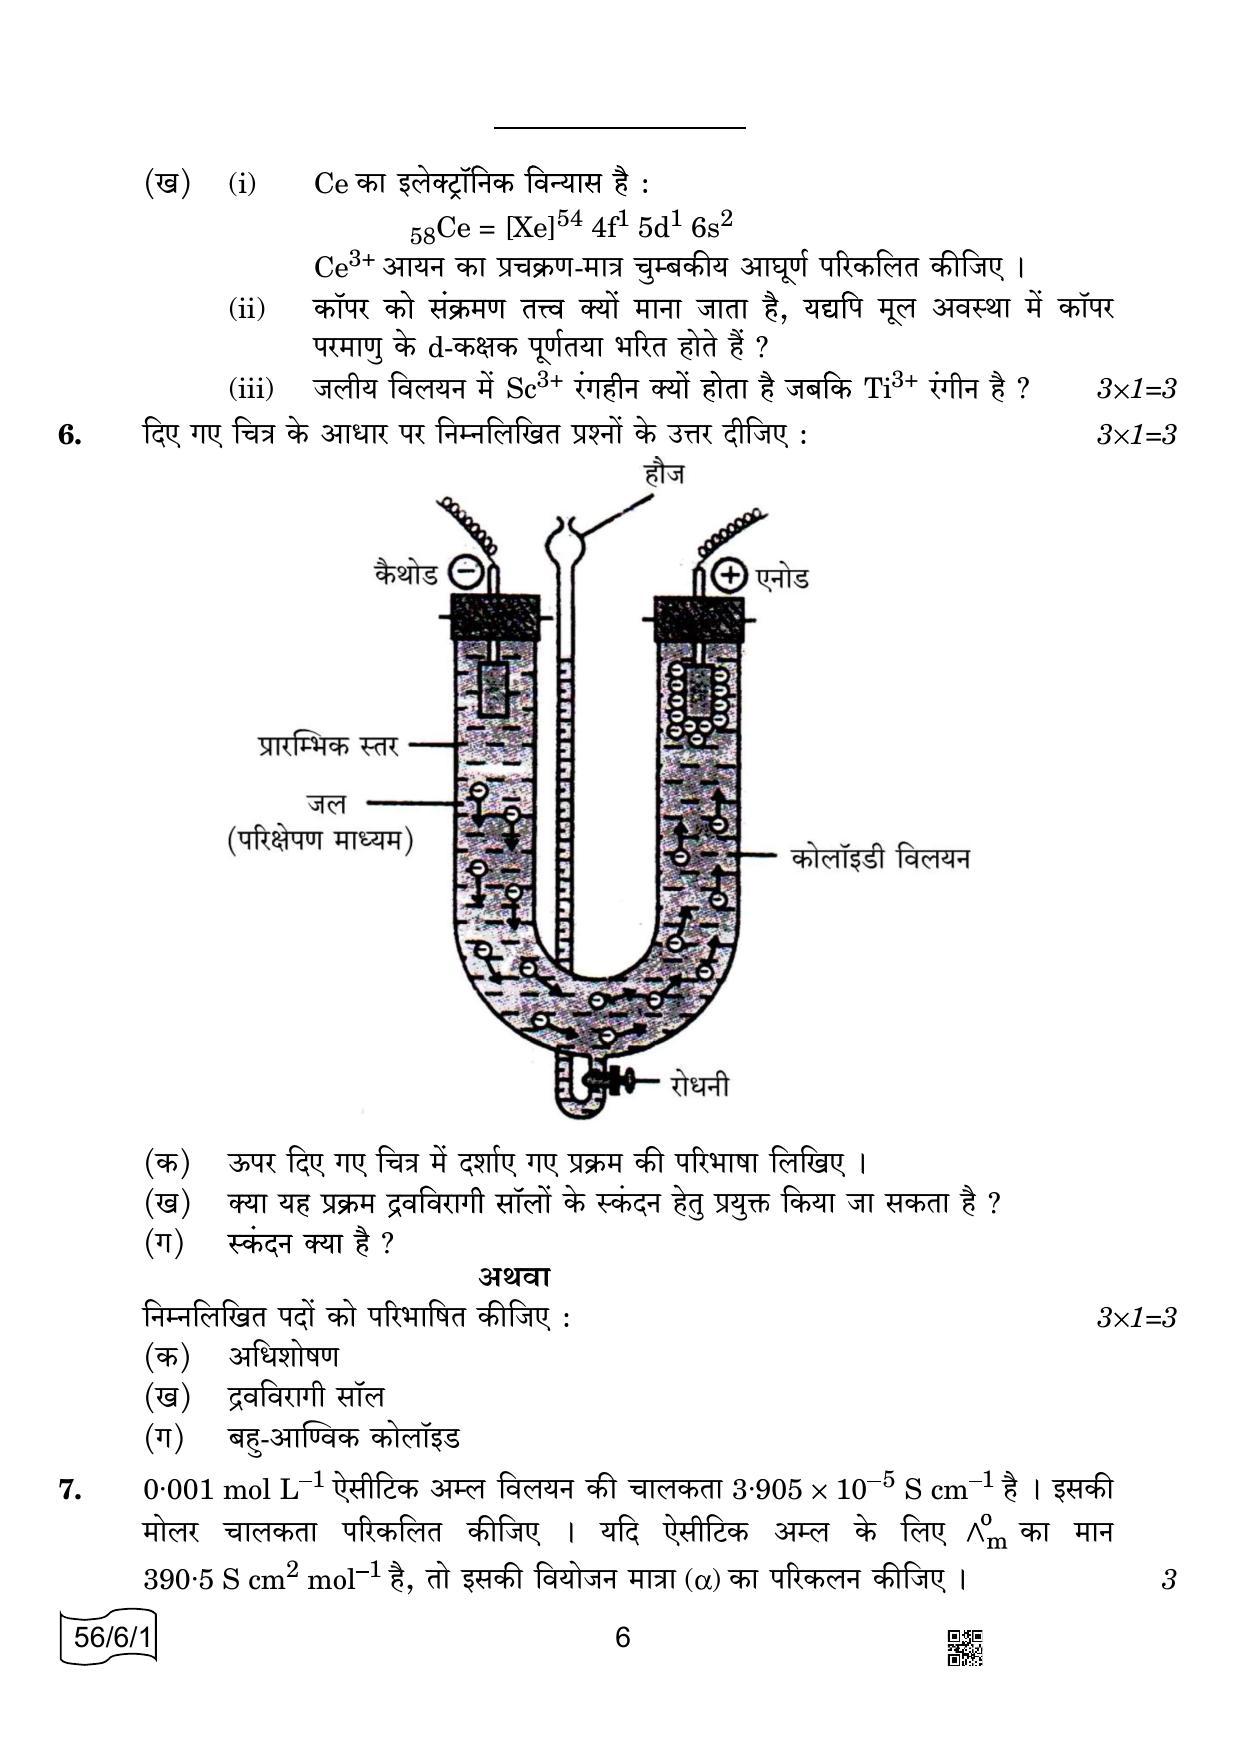 CBSE Class 12 56-6-1 CHEMISTRY 2022 Compartment Question Paper - Page 6